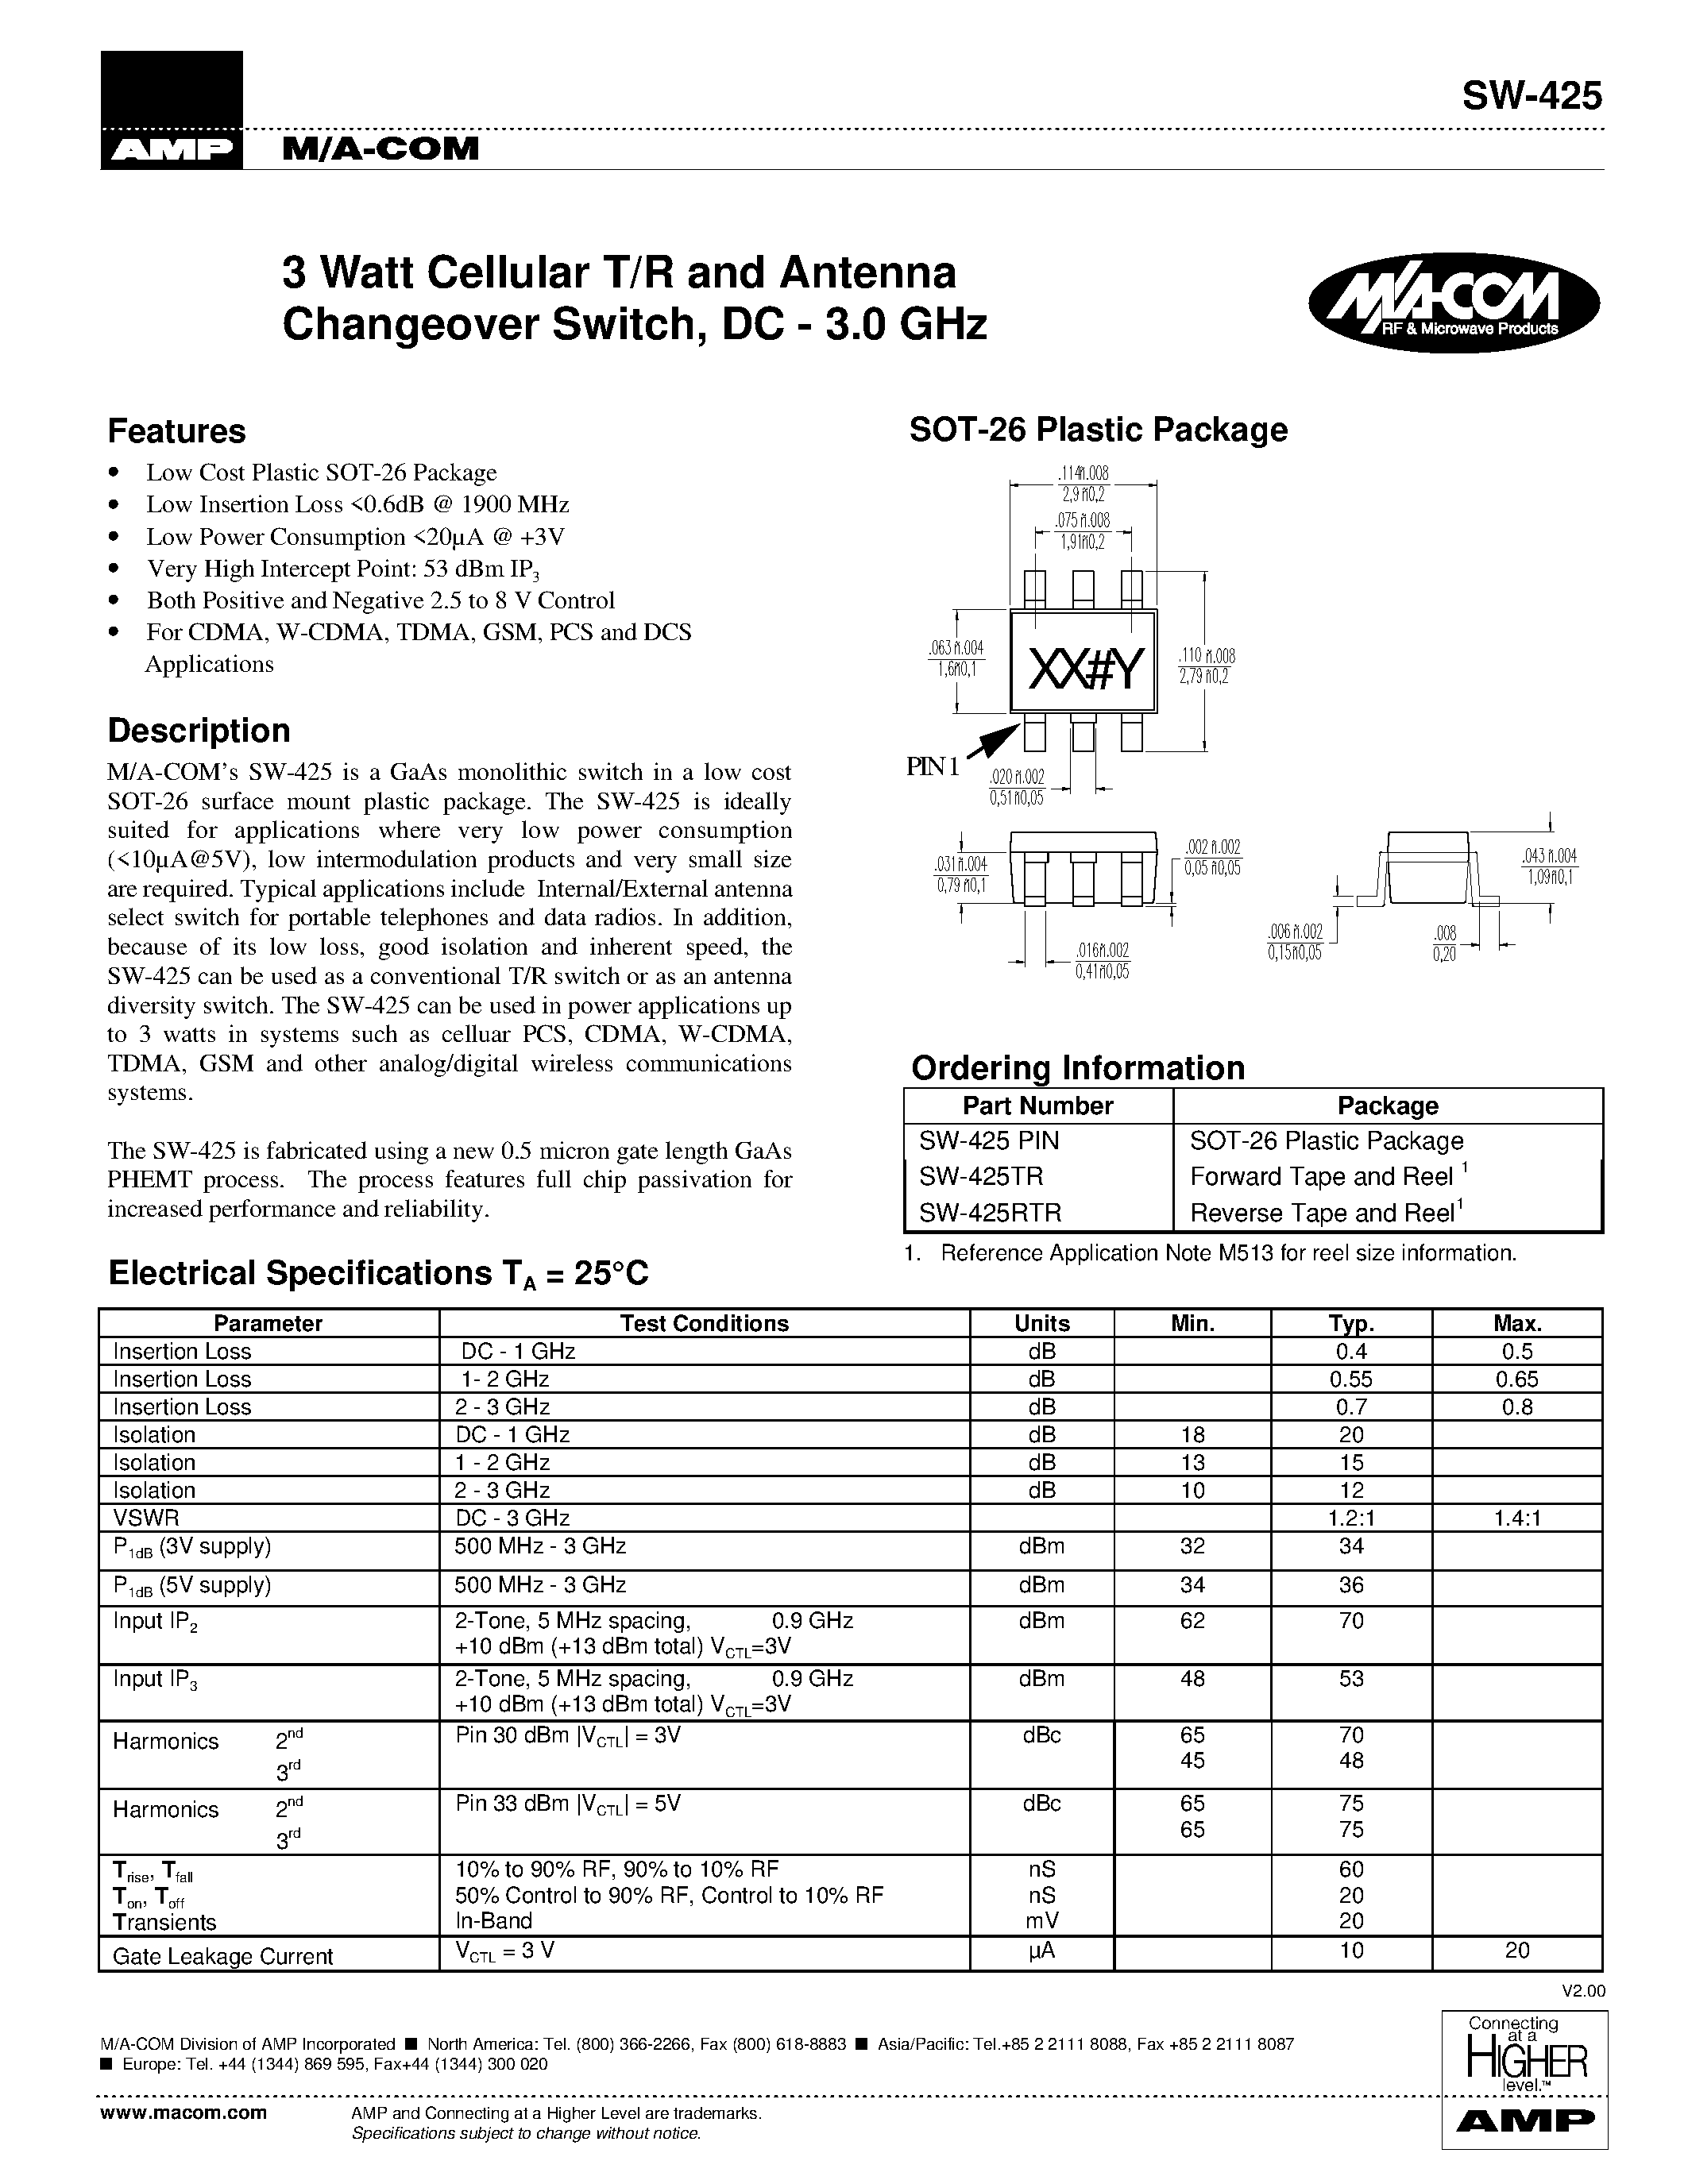 Datasheet SW-425 - 3 Watt Cellular T/R and Antenna Changeover Switch page 1